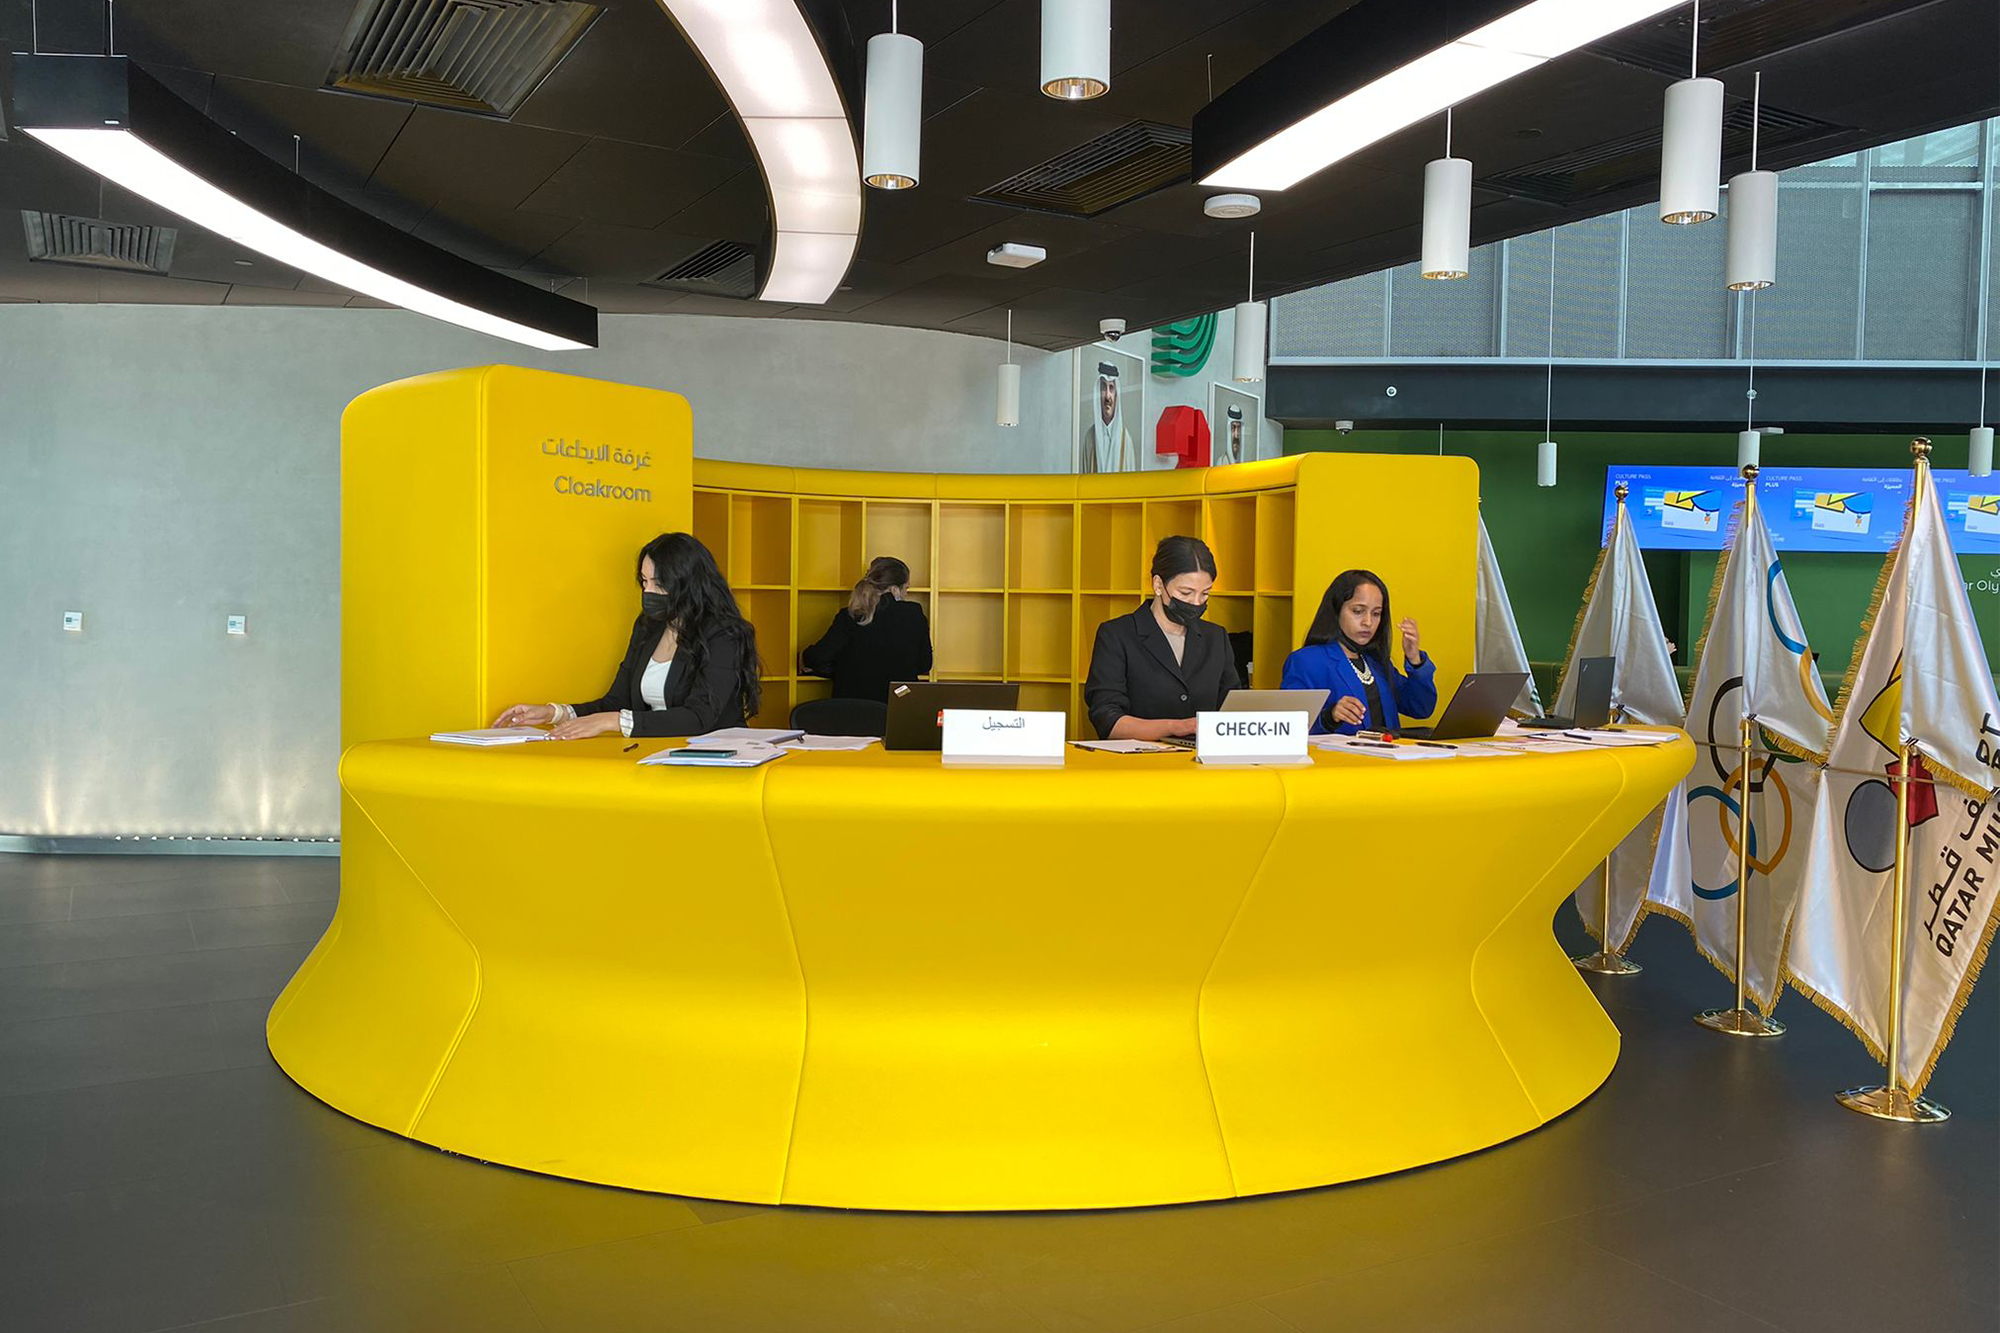 curving yellow reception desk, receptionists